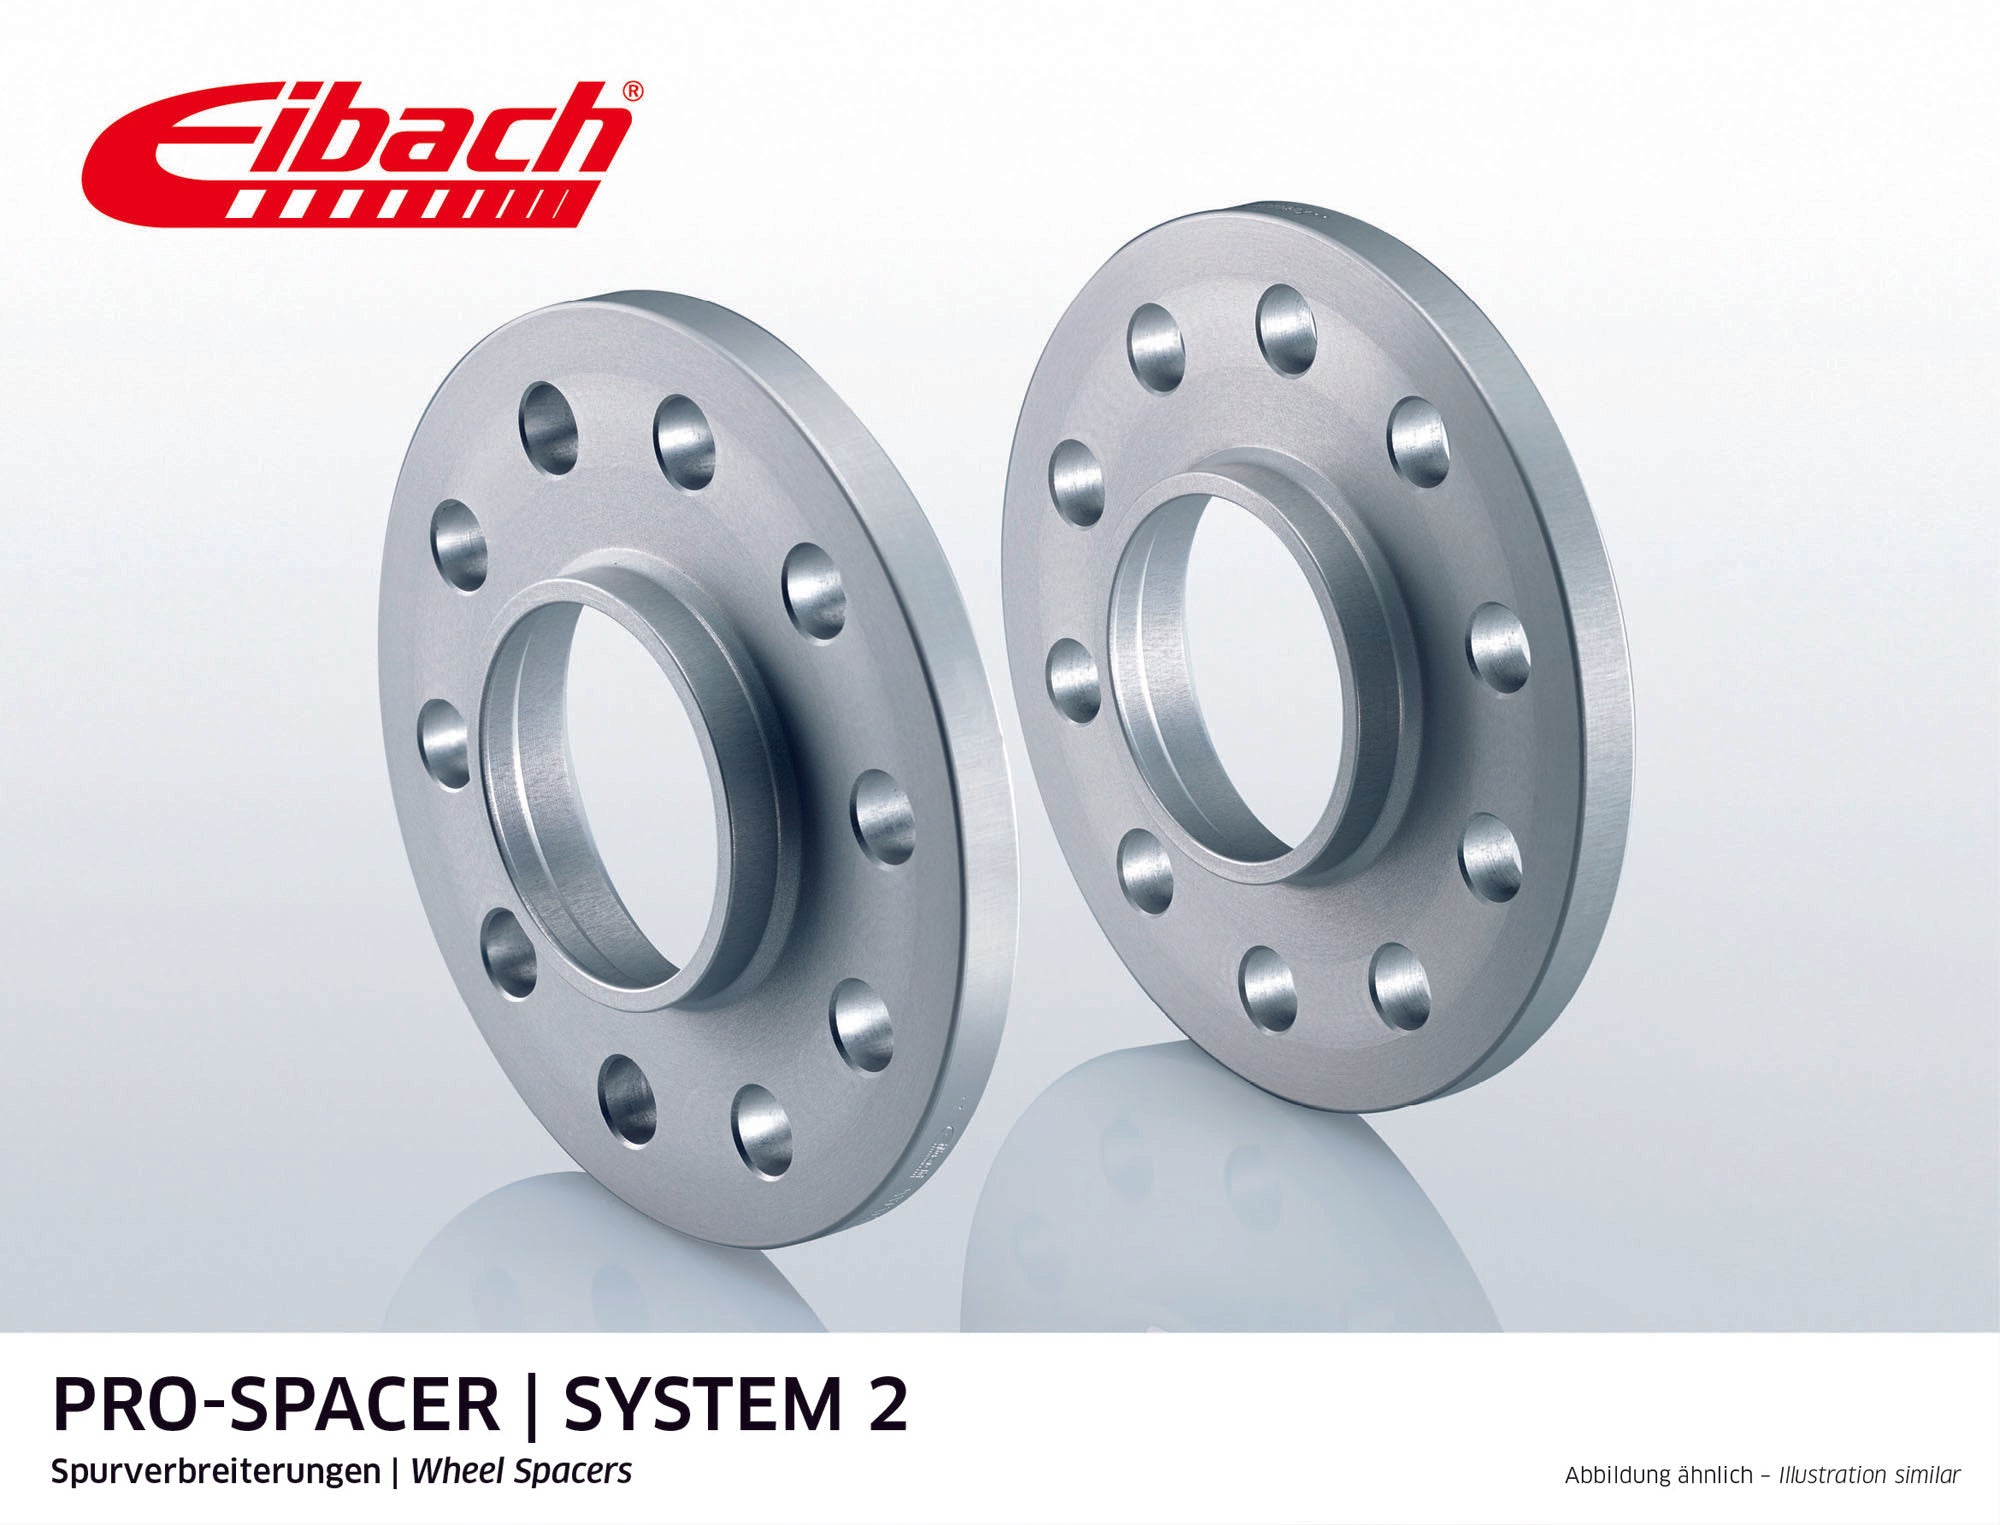 Eibach 15mm Pro-Spacer - Silver Anodized Wheel Spacer BOXSTER 2004-11 #S90-2-15-018